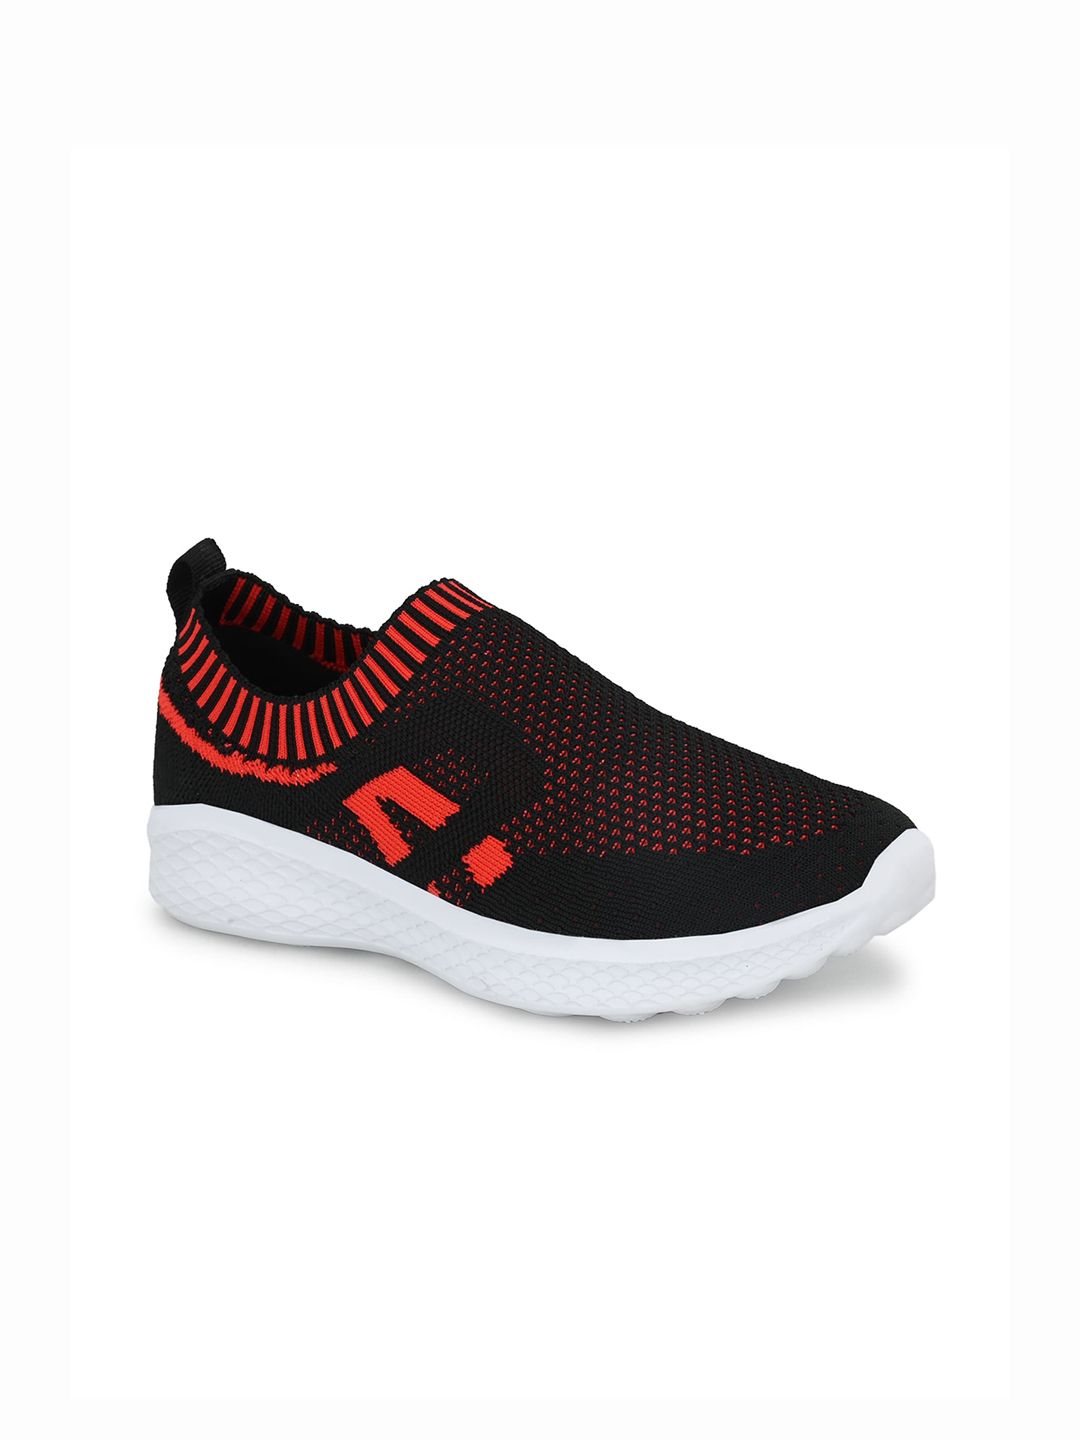 Roadster Women Black Patterned Casual Sneakers Price in India